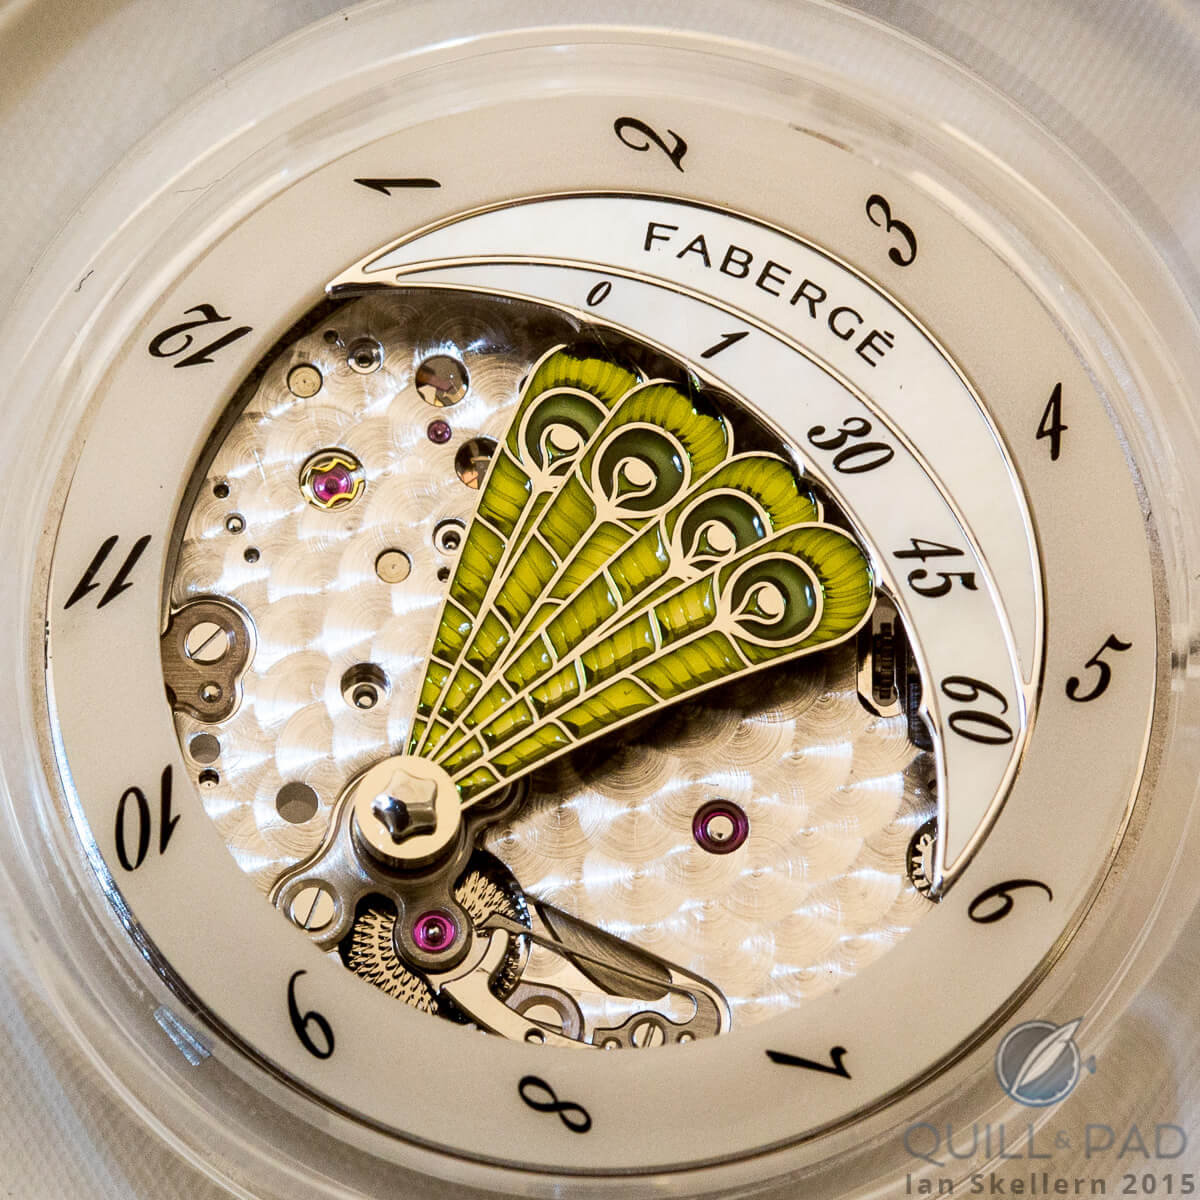 A look under the dial of the Fabergé Lady Complicée Peacock